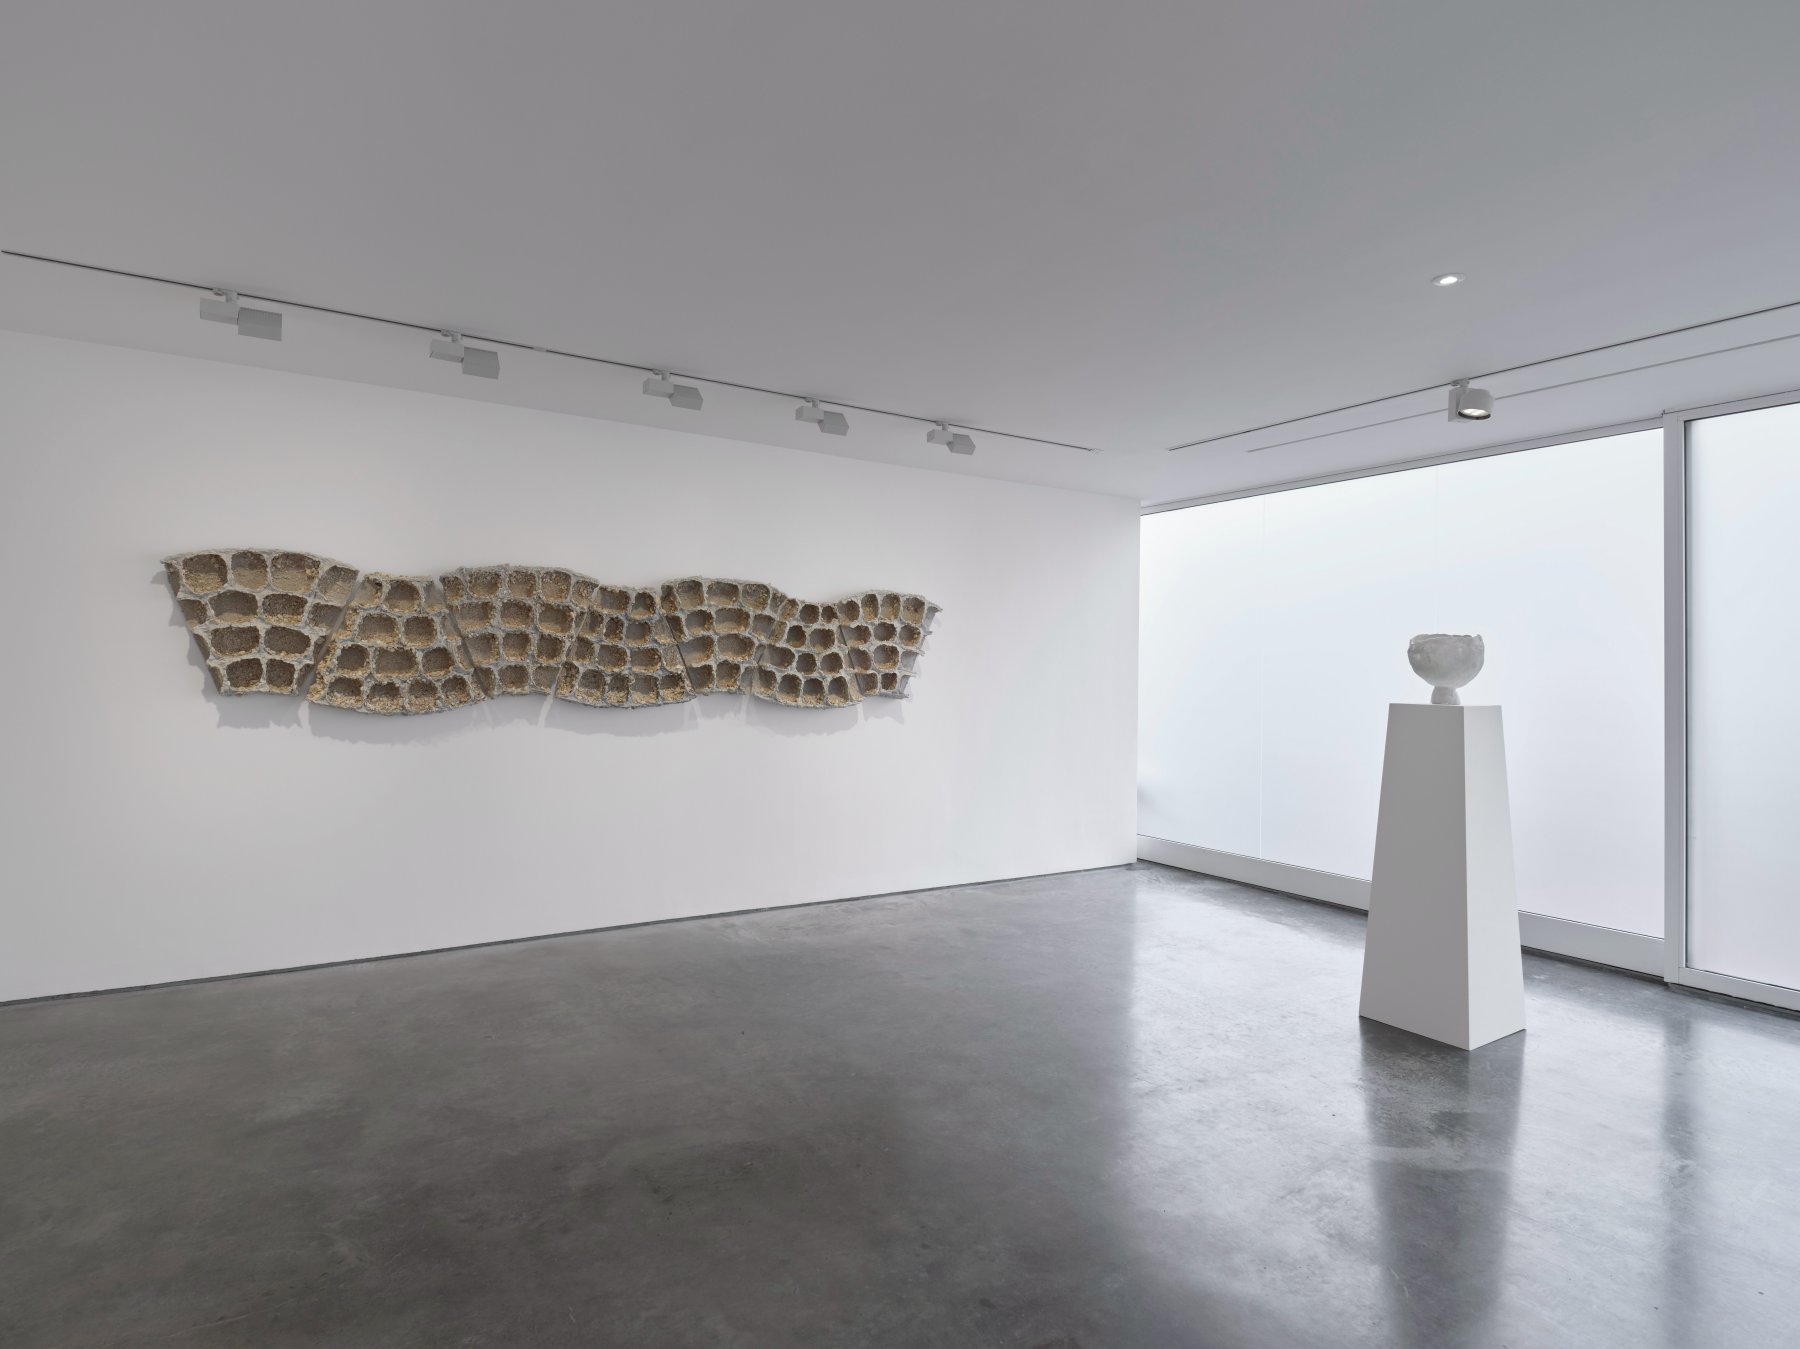 Installation image for Masaomi Yasunaga: Clouds in the Distance, at Lisson Gallery